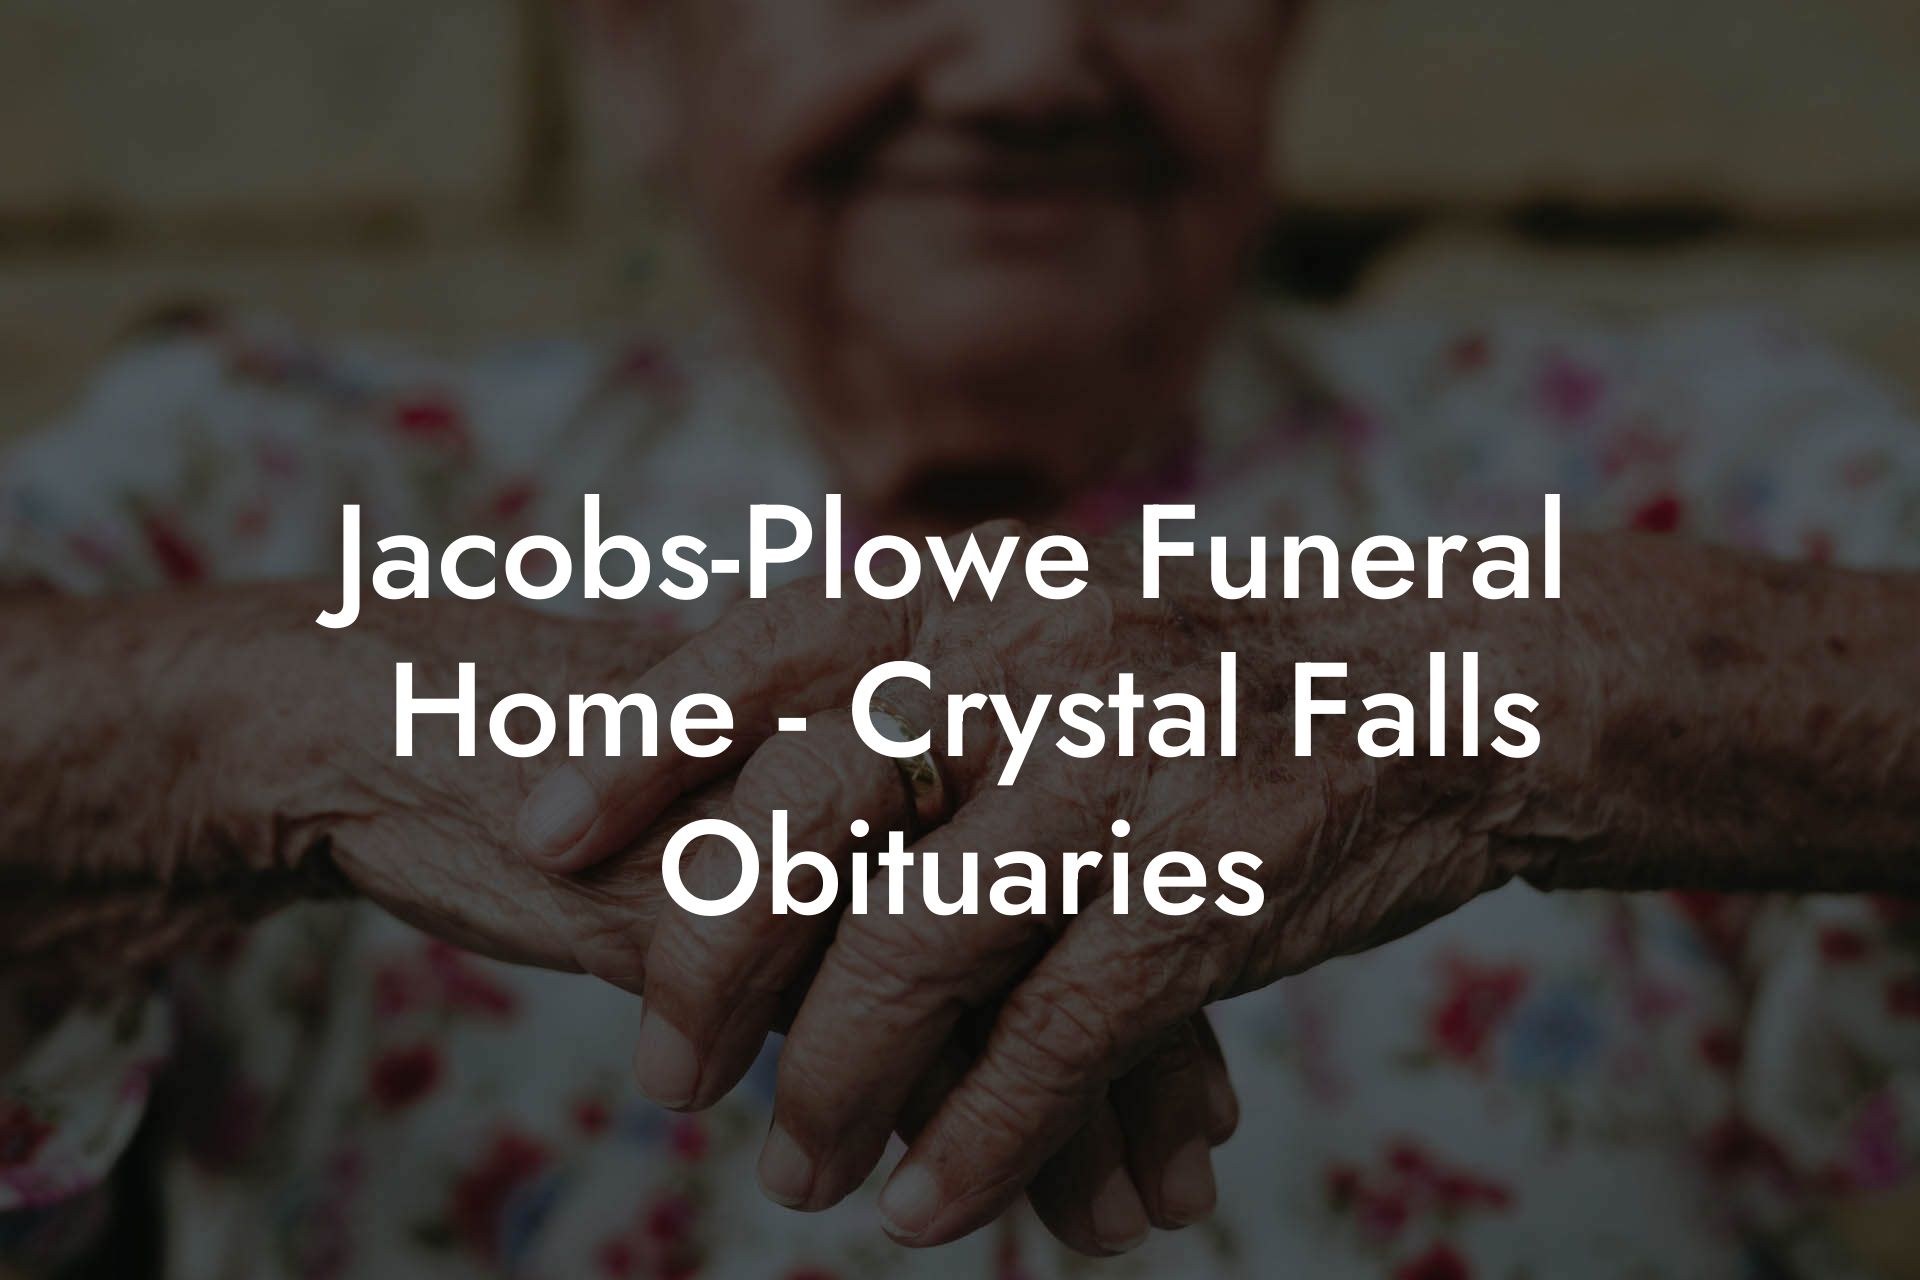 Jacobs-Plowe Funeral Home - Crystal Falls Obituaries